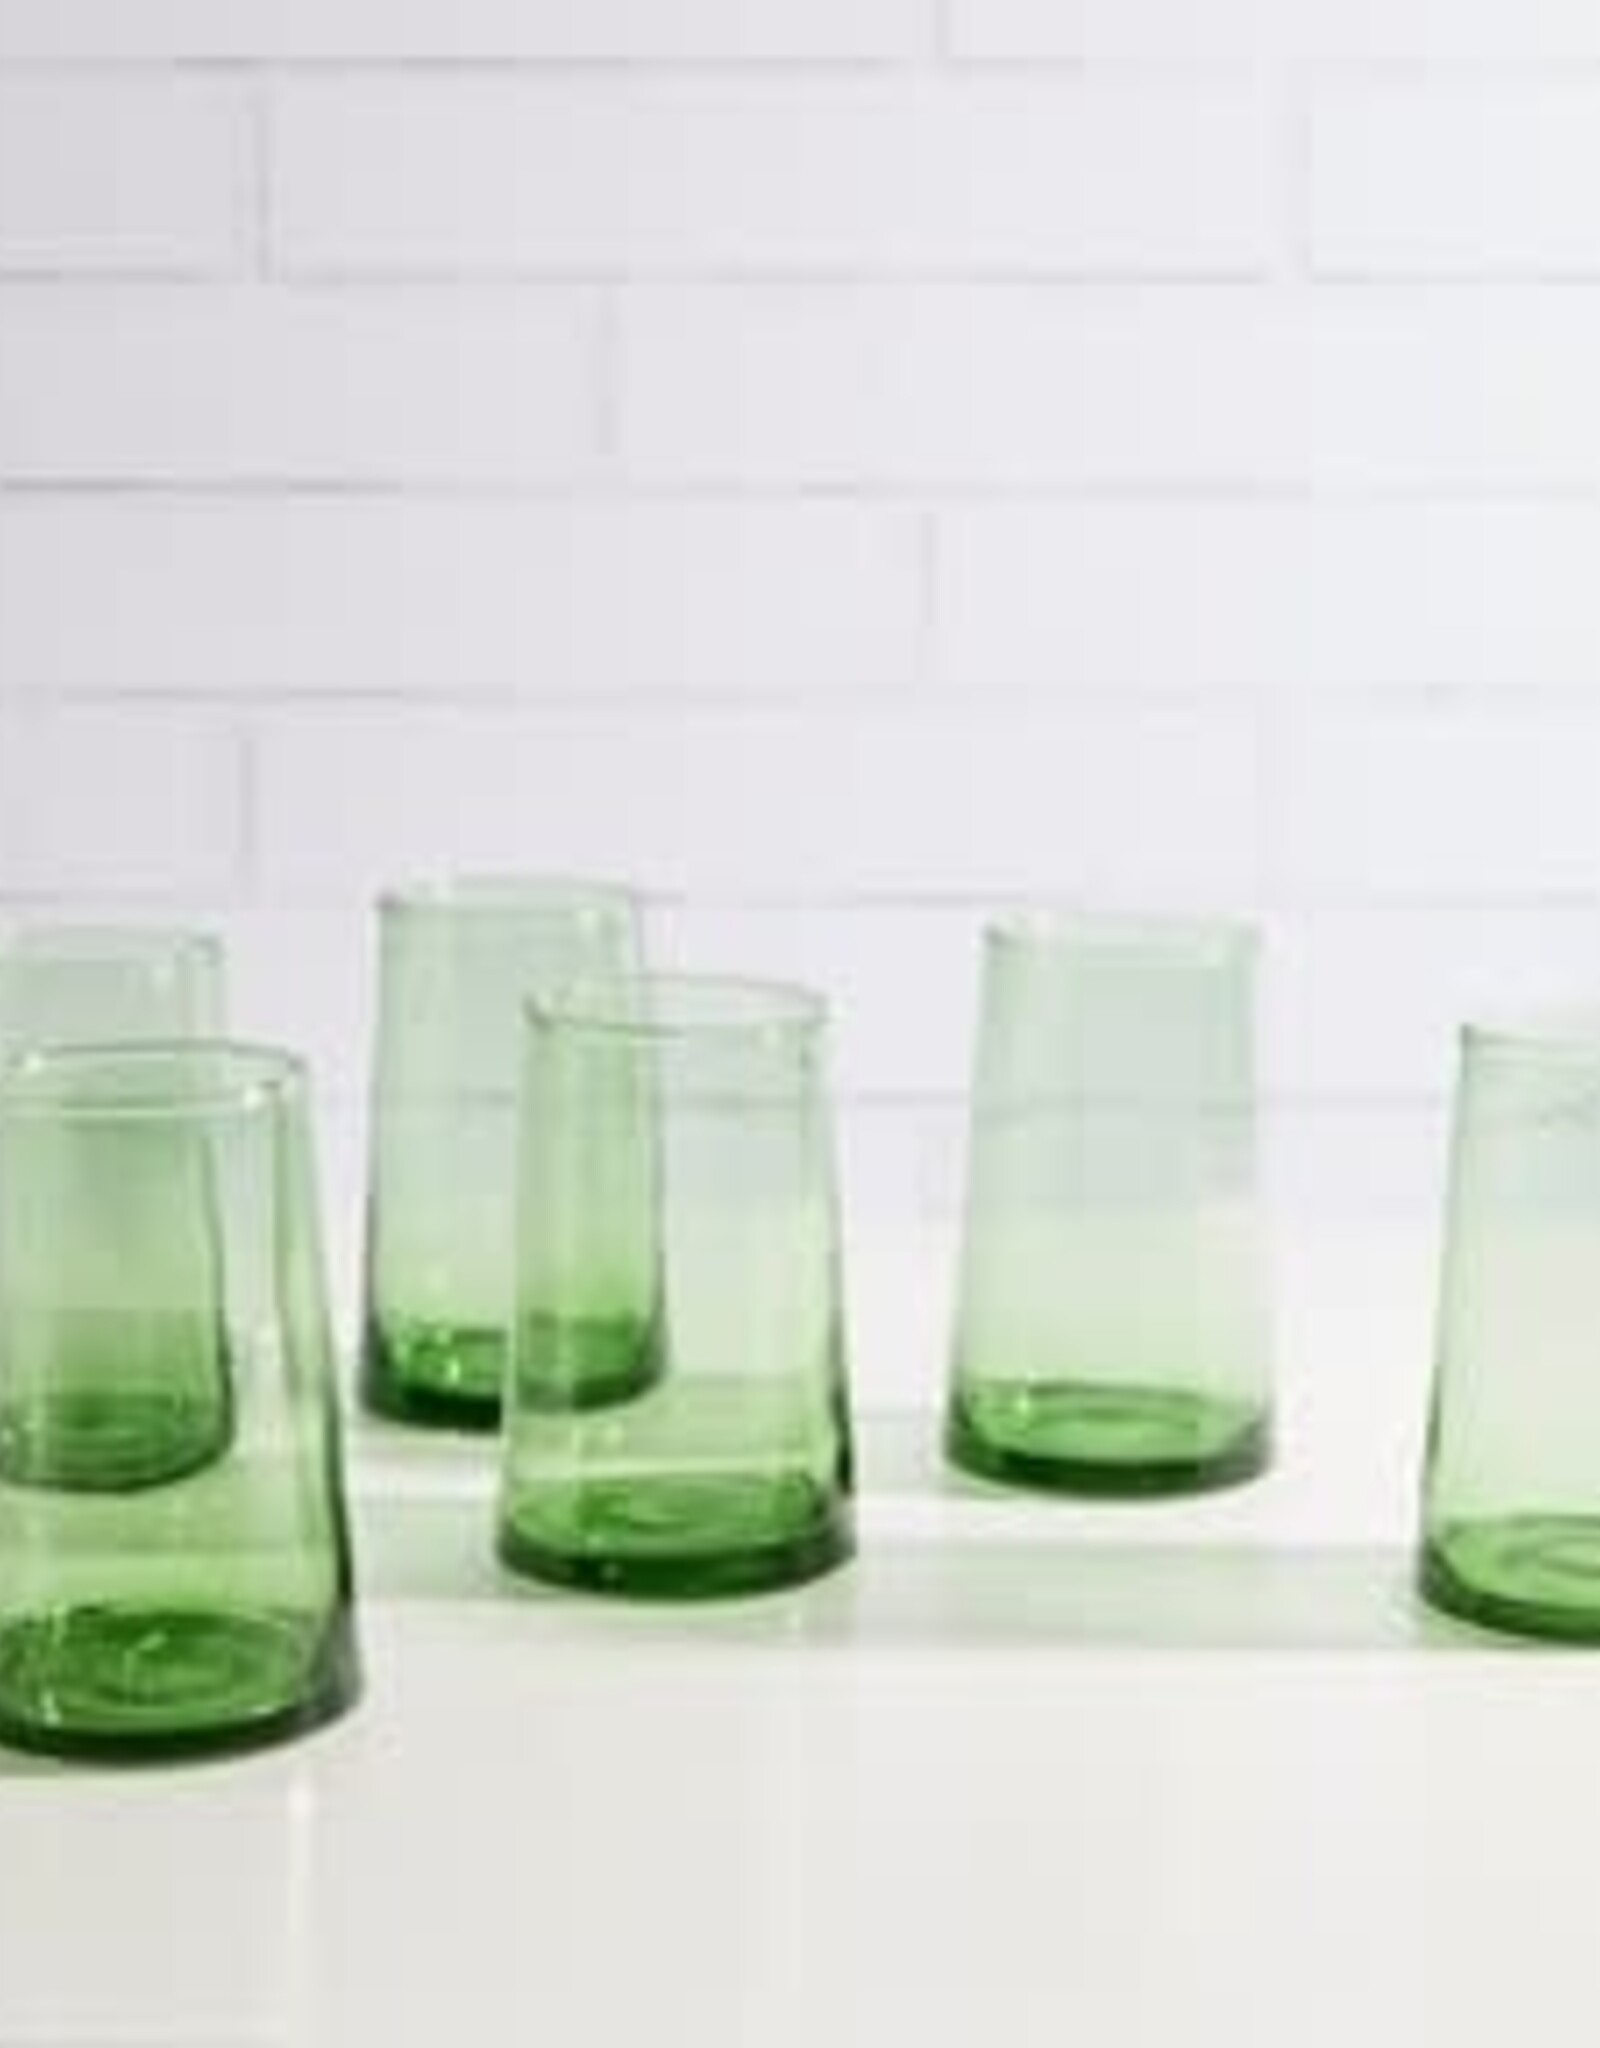 Verve Culture Moroccan Cone Glasses- Large Green-Set of 6